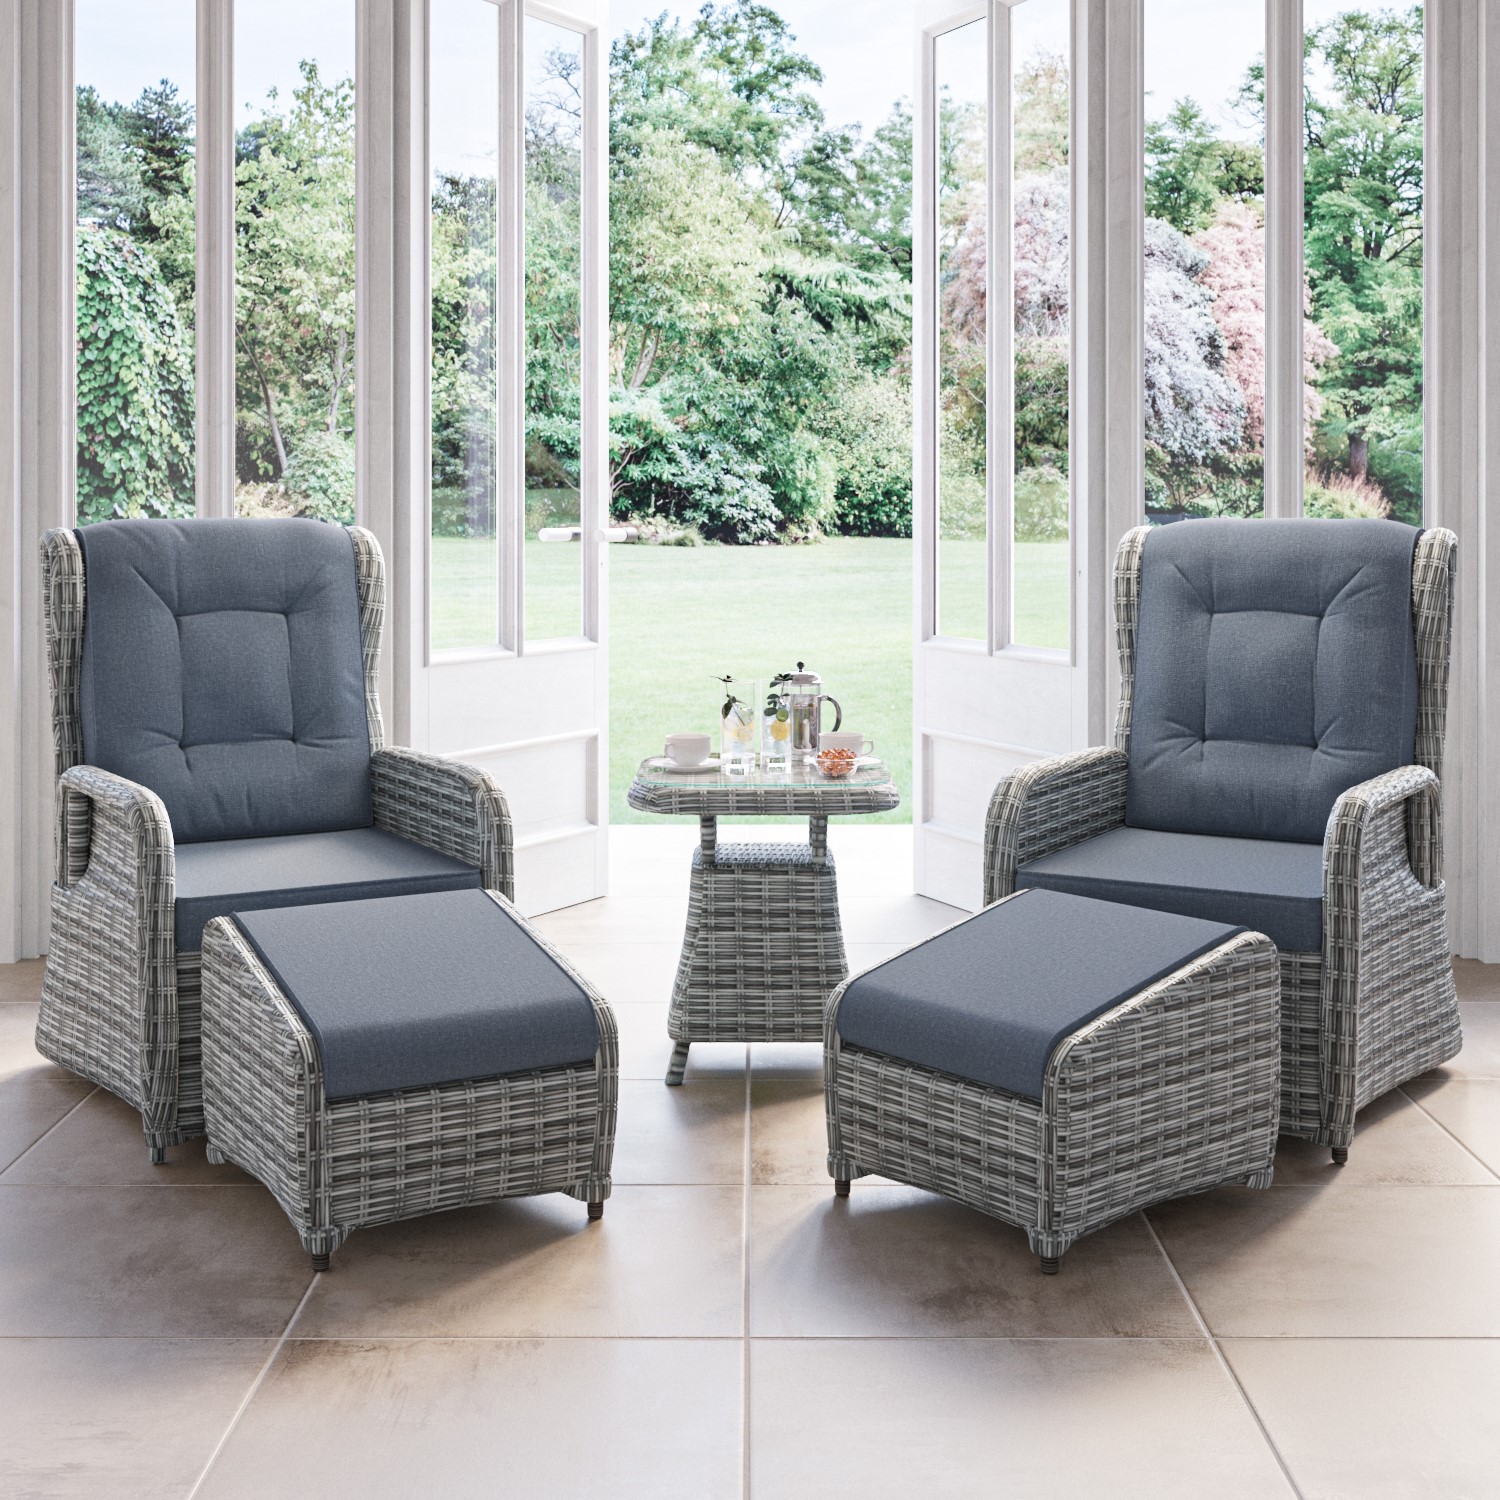 Read more about Dark grey rattan reclining sun lounger set with table and footstools aspen